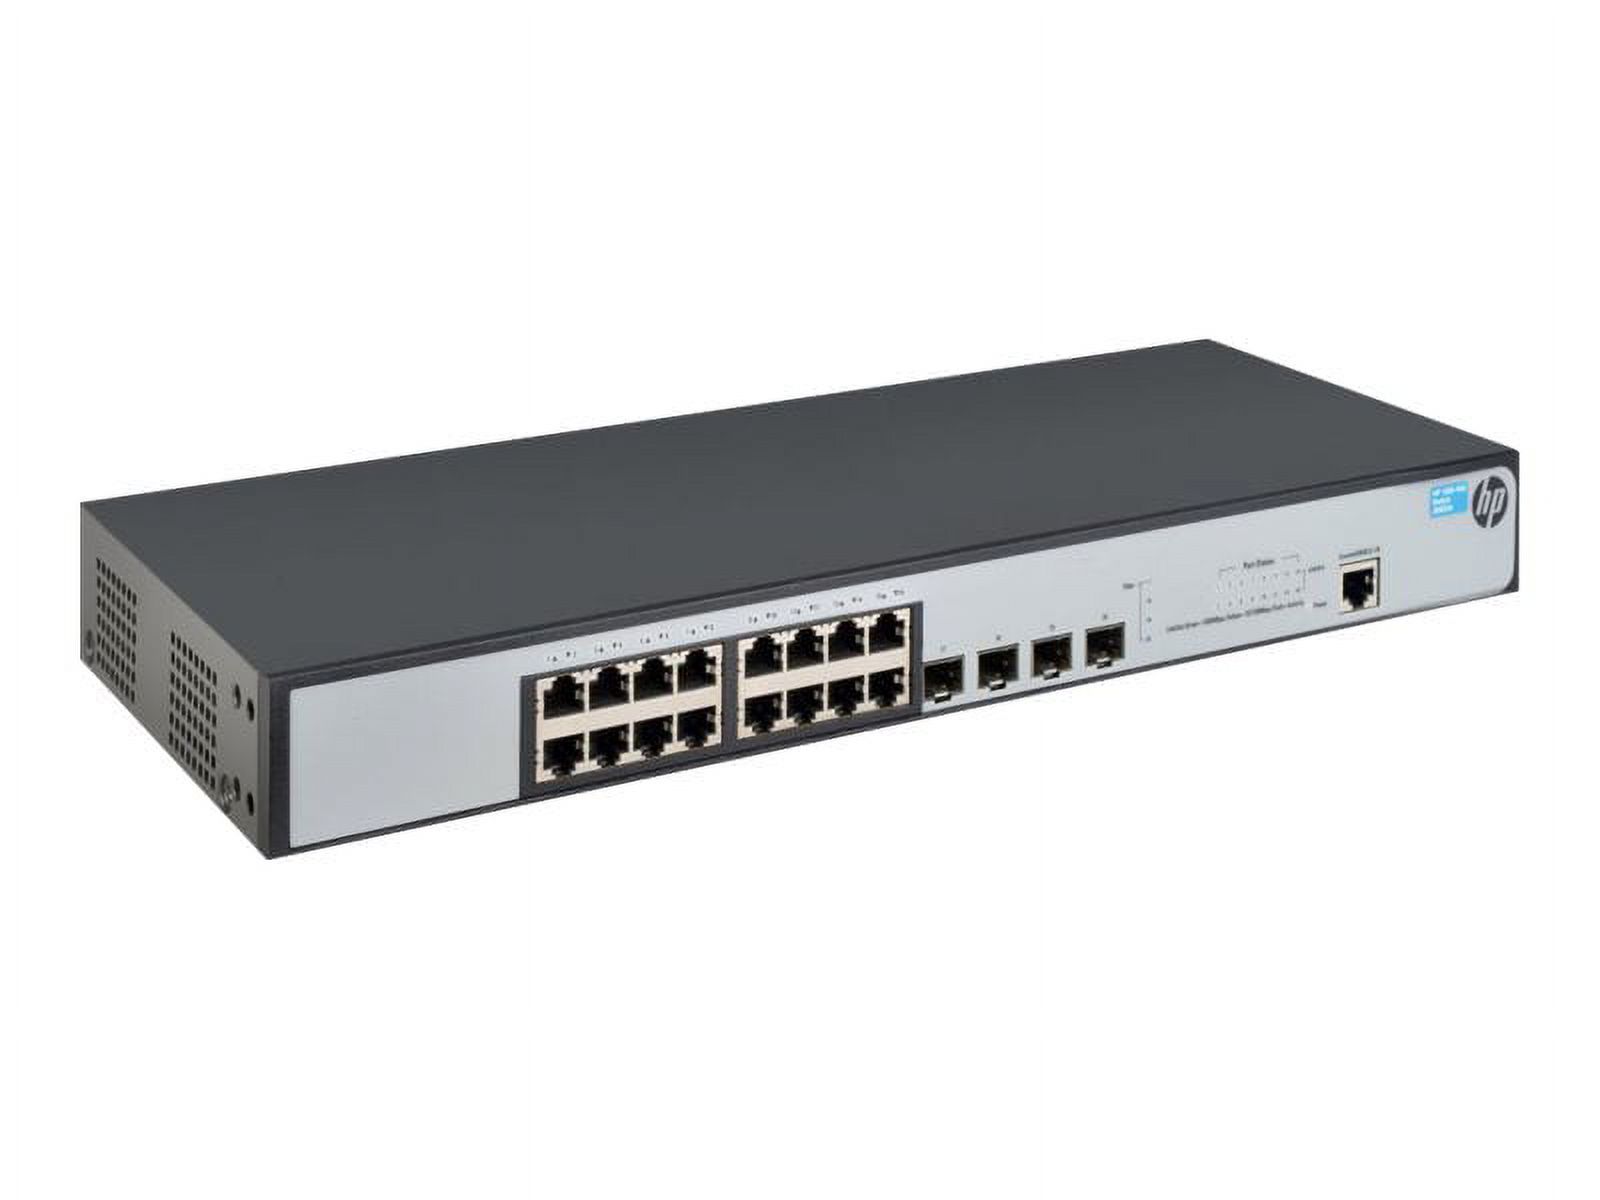 HPE Networking BTO - JG923A#ABA - HP 1920-16G Switch - image 3 of 6